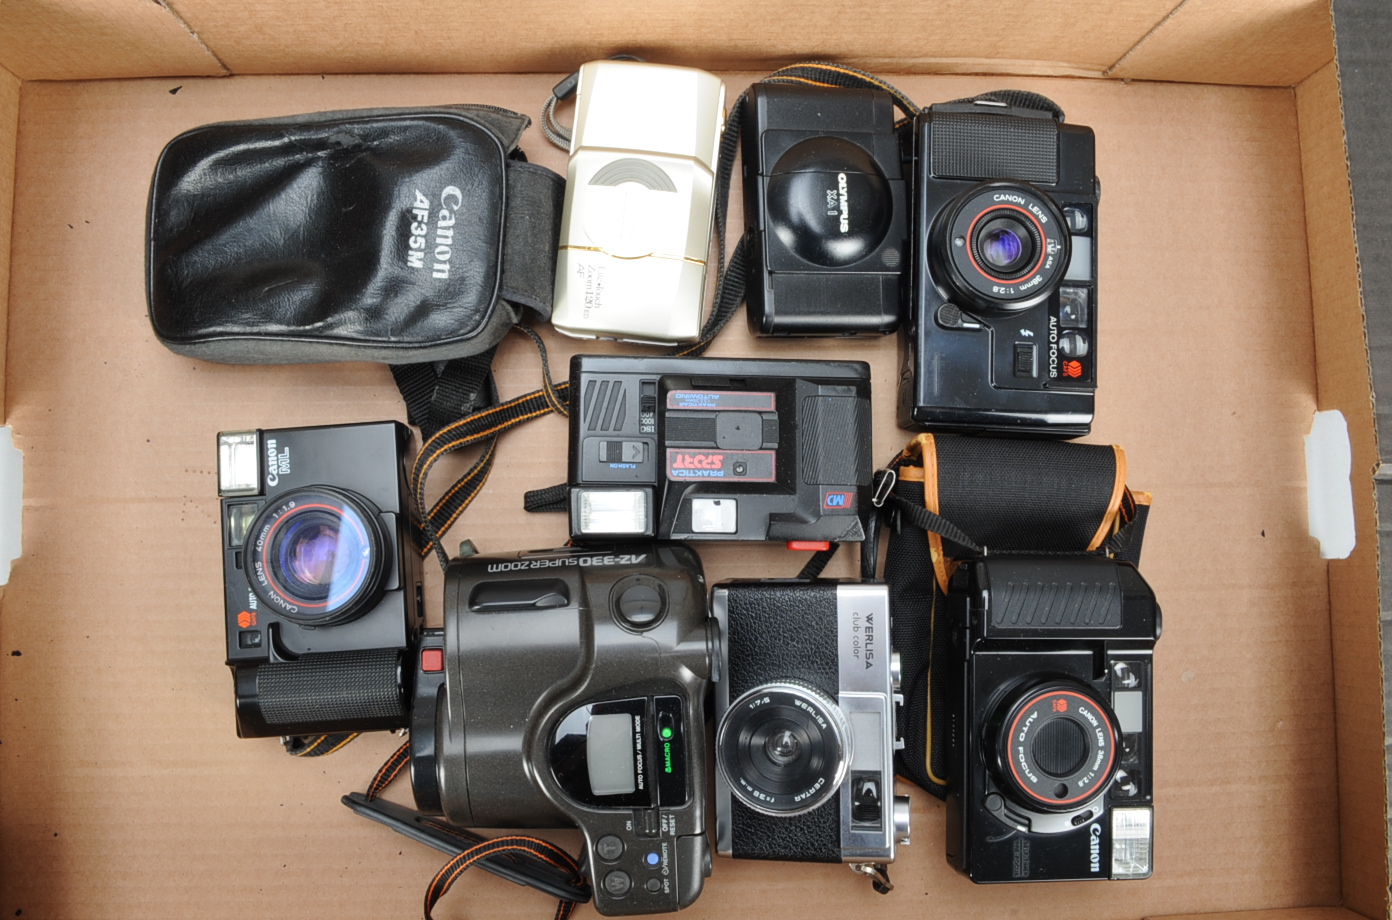 A Tray of Compact Cameras, including an Olympus XA-1, Canon sure shot, AF35M, AF35ML, Nikon zoom 120